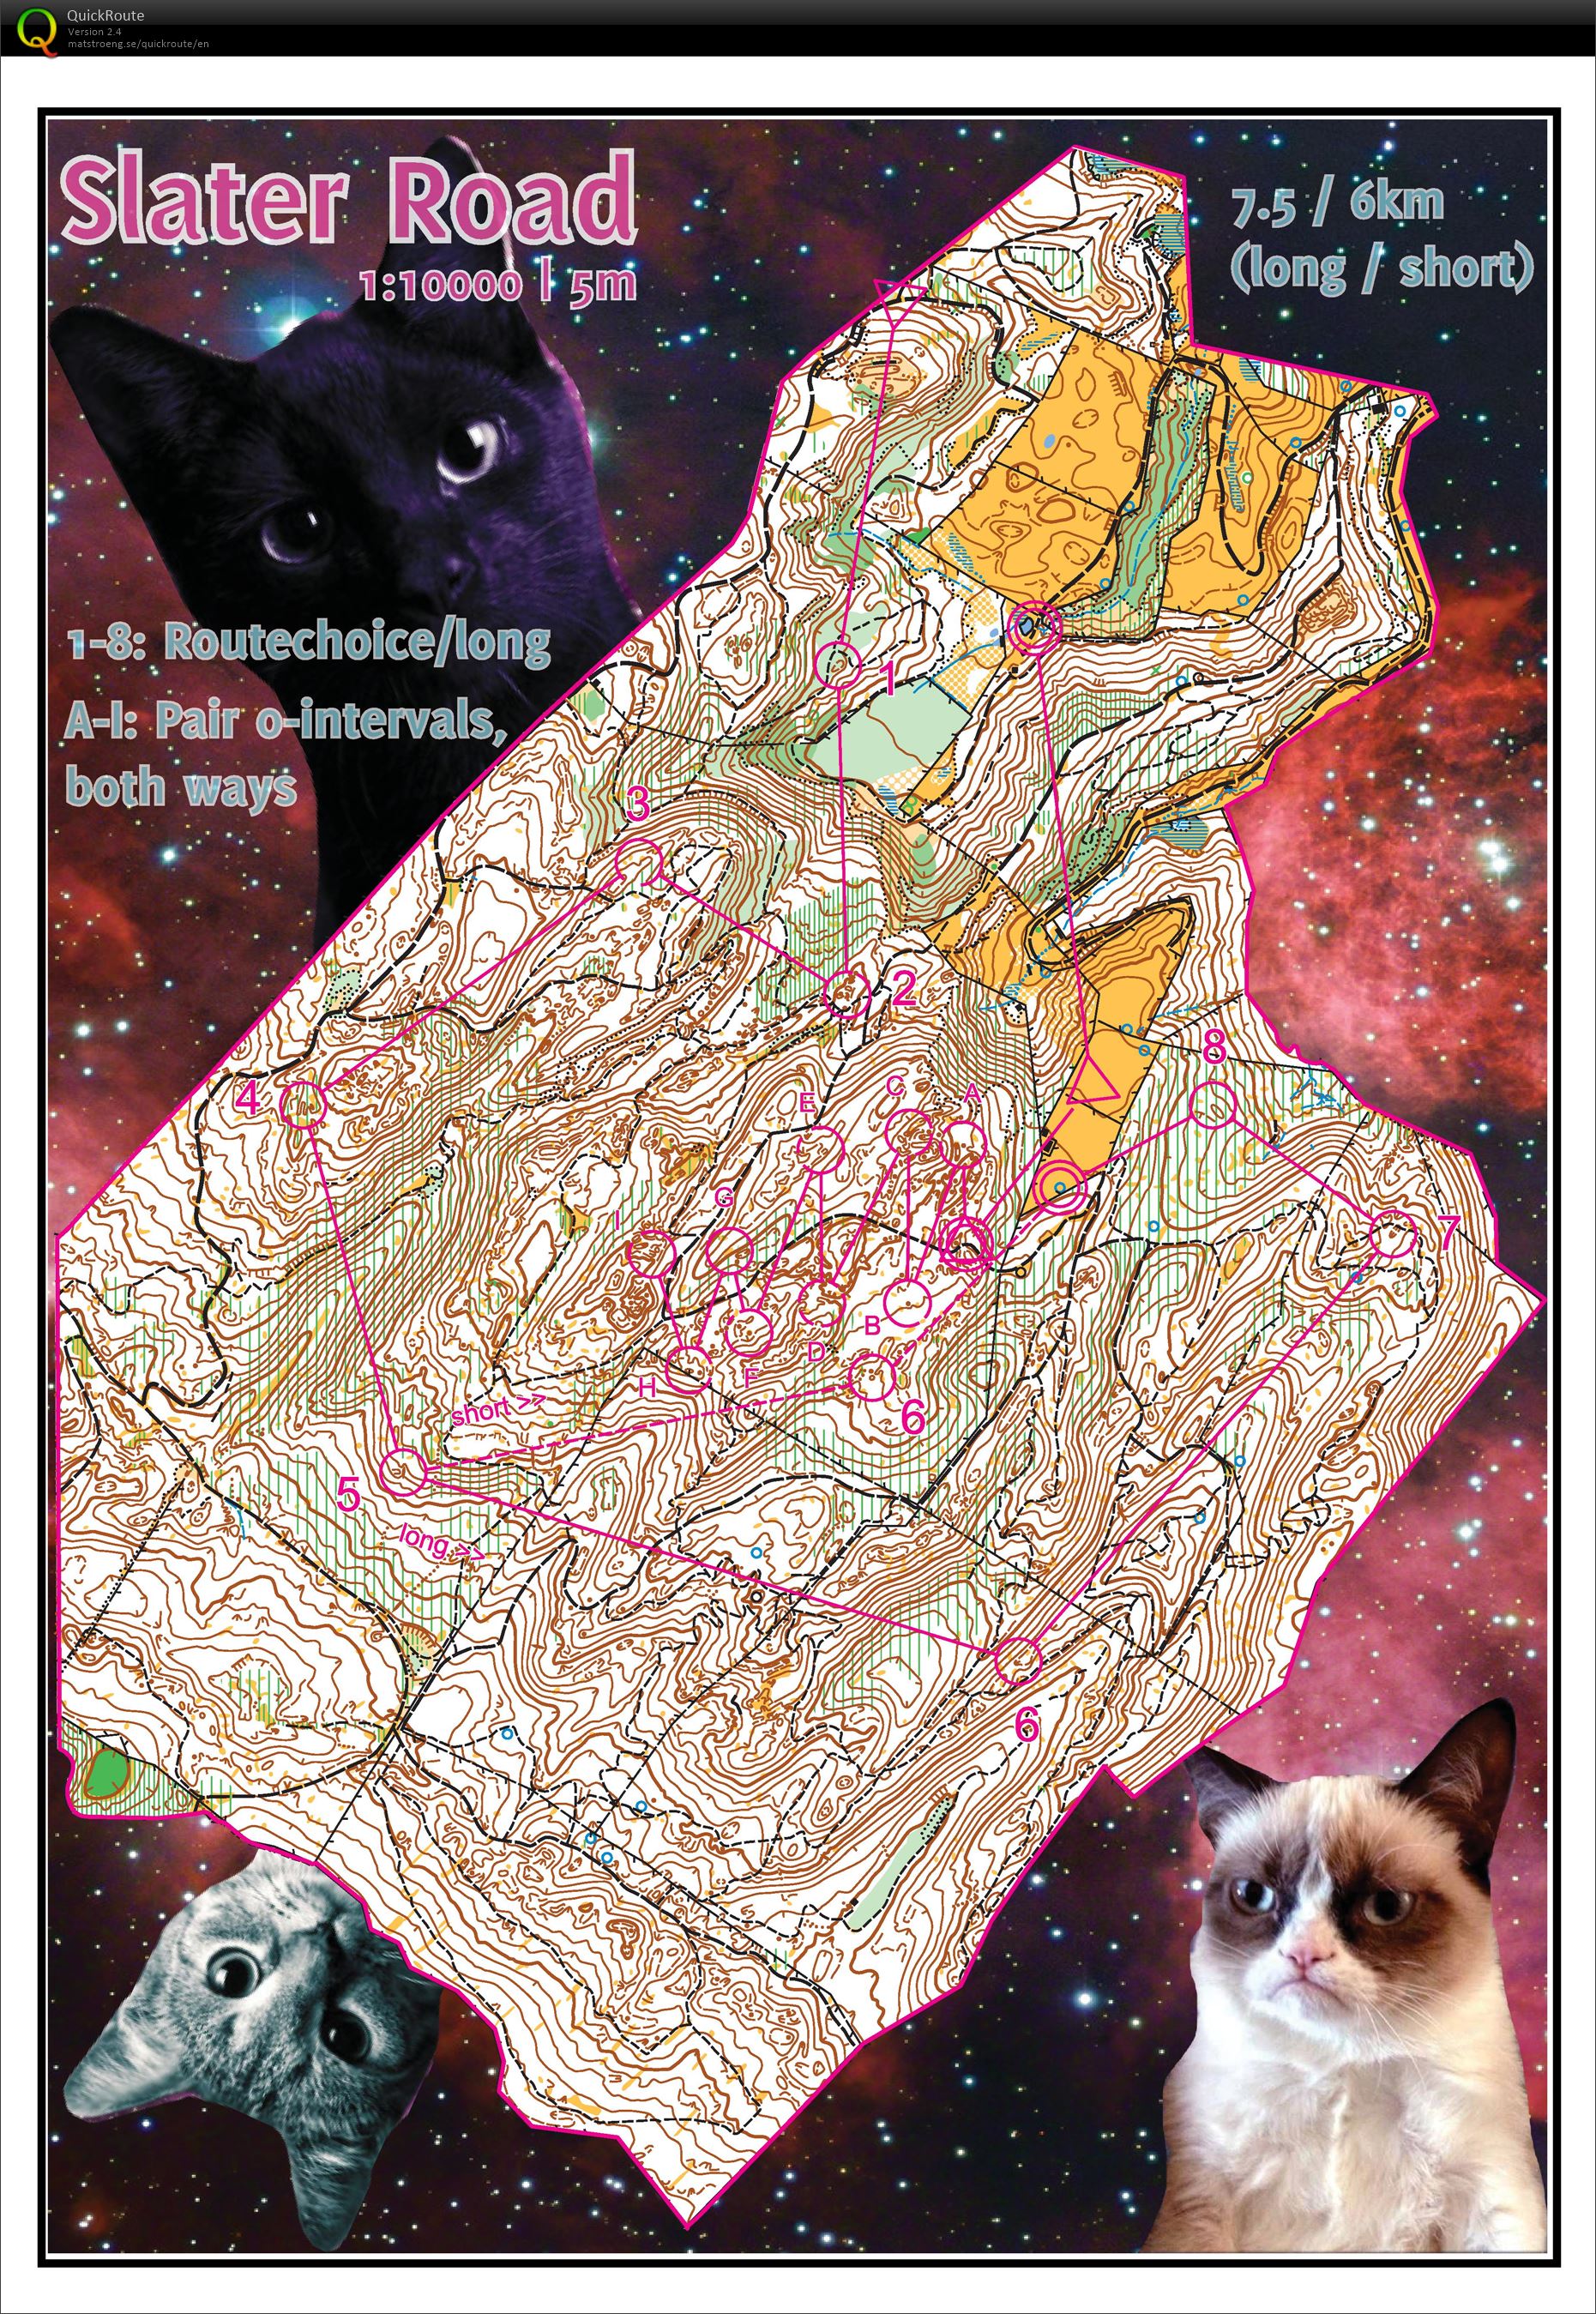 Space Cats - Part 2 (26-04-2014)